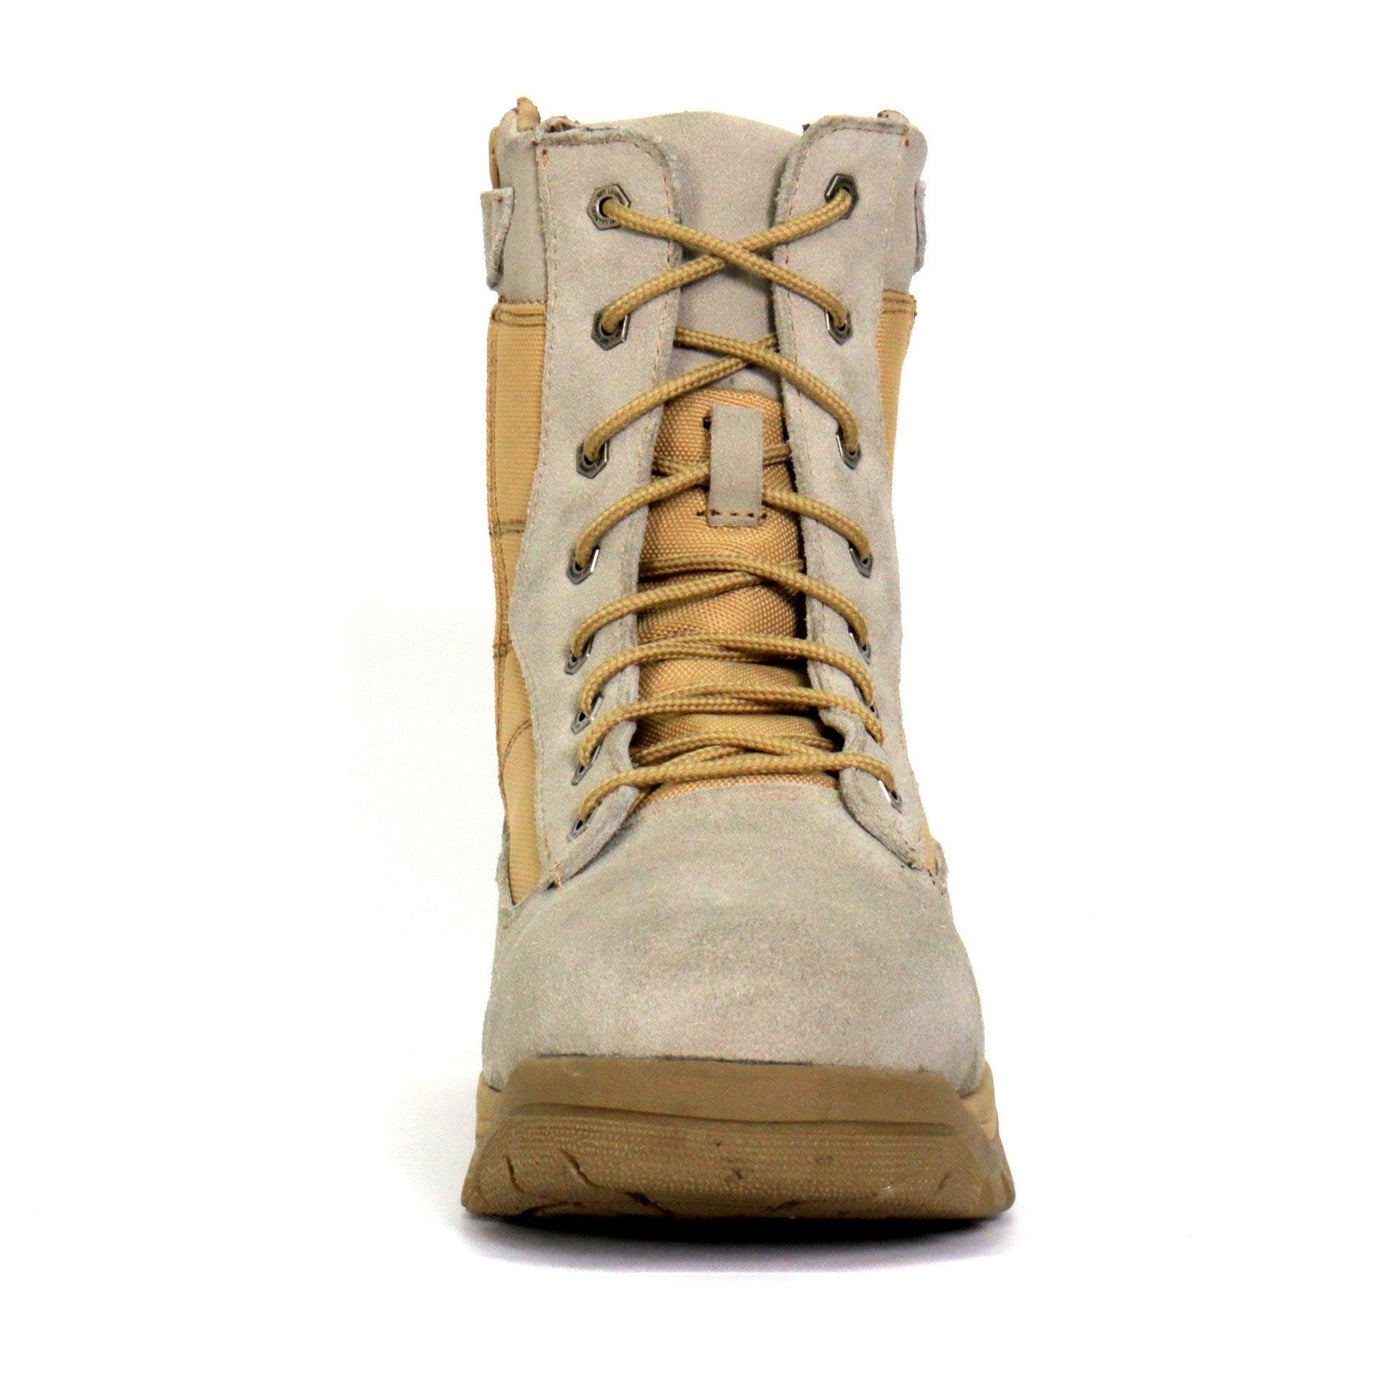 Hot Leathers Military Desert Tan Boots - American Legend Rider